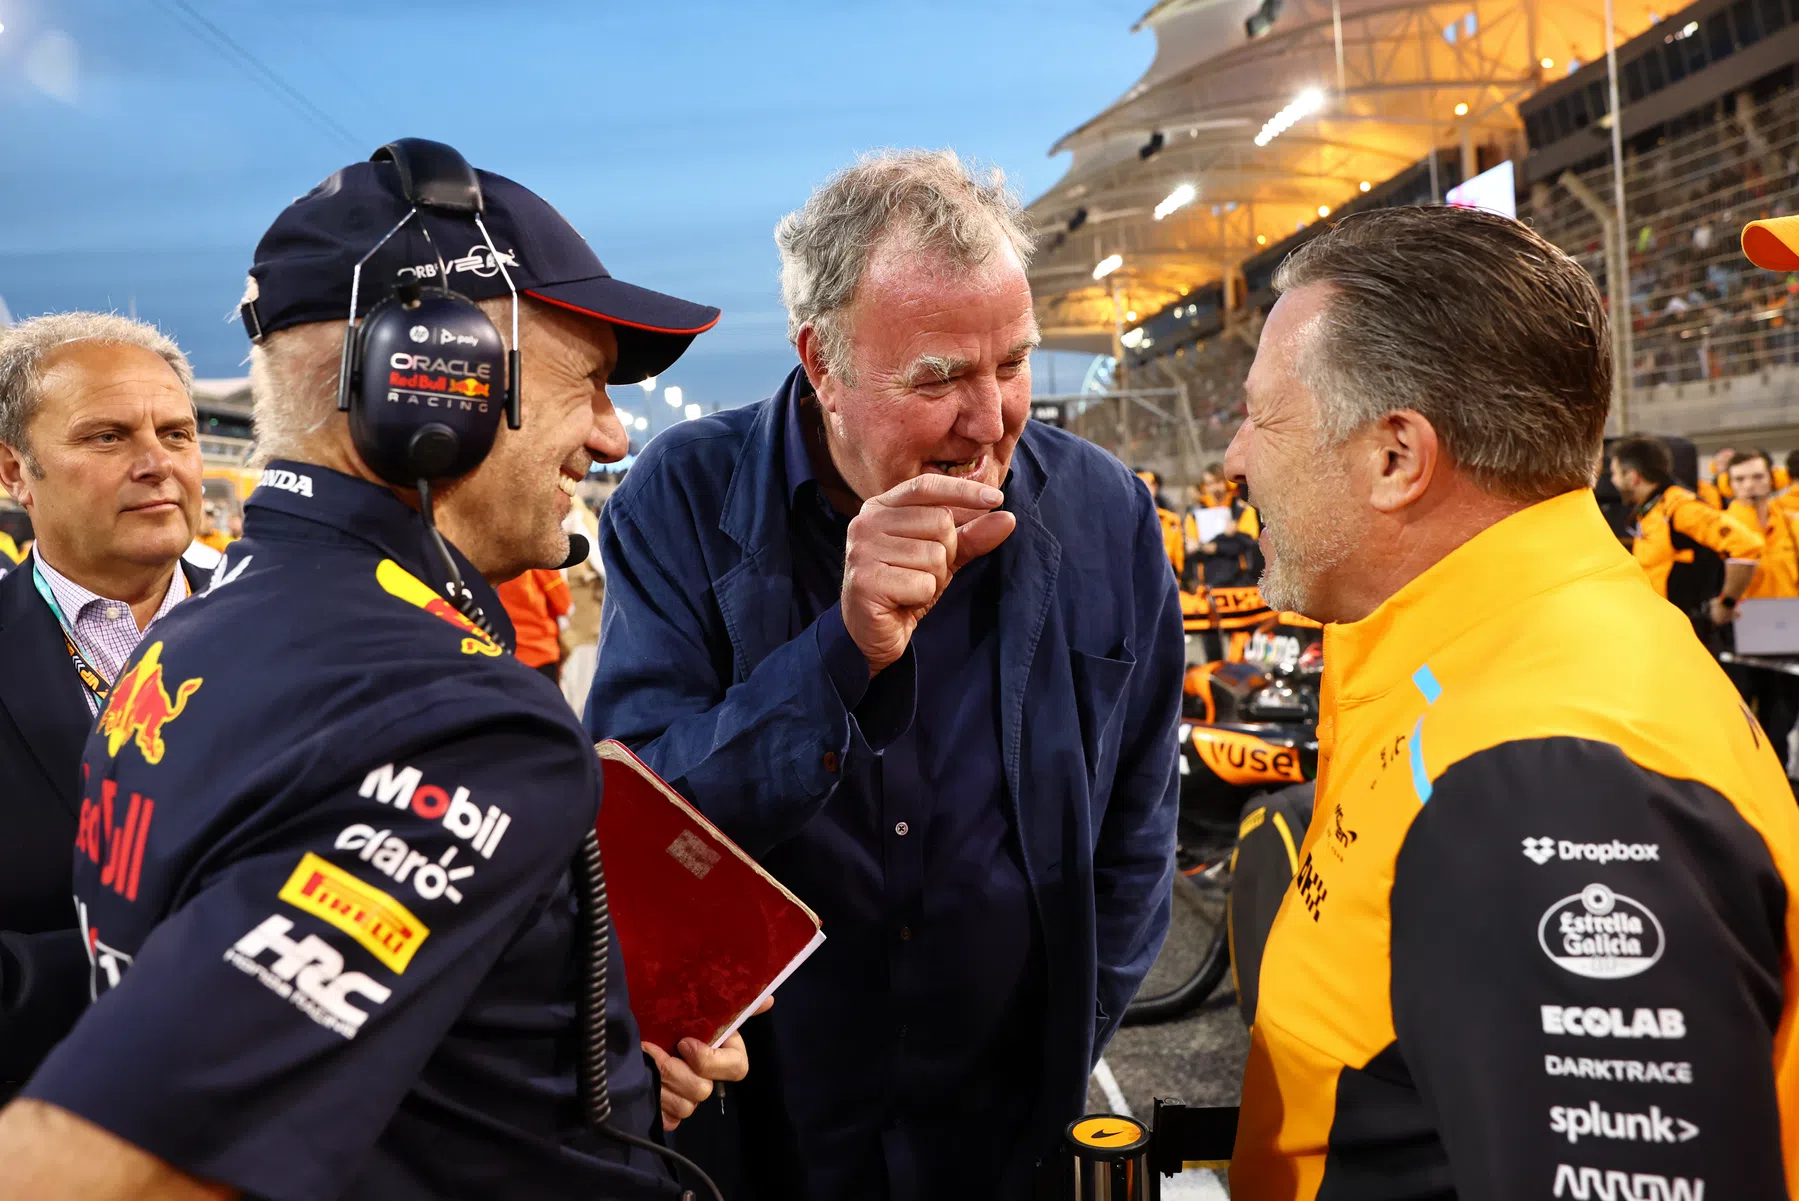 Jeremy Clarkson gives opinion on the crash between Norris and Verstappen